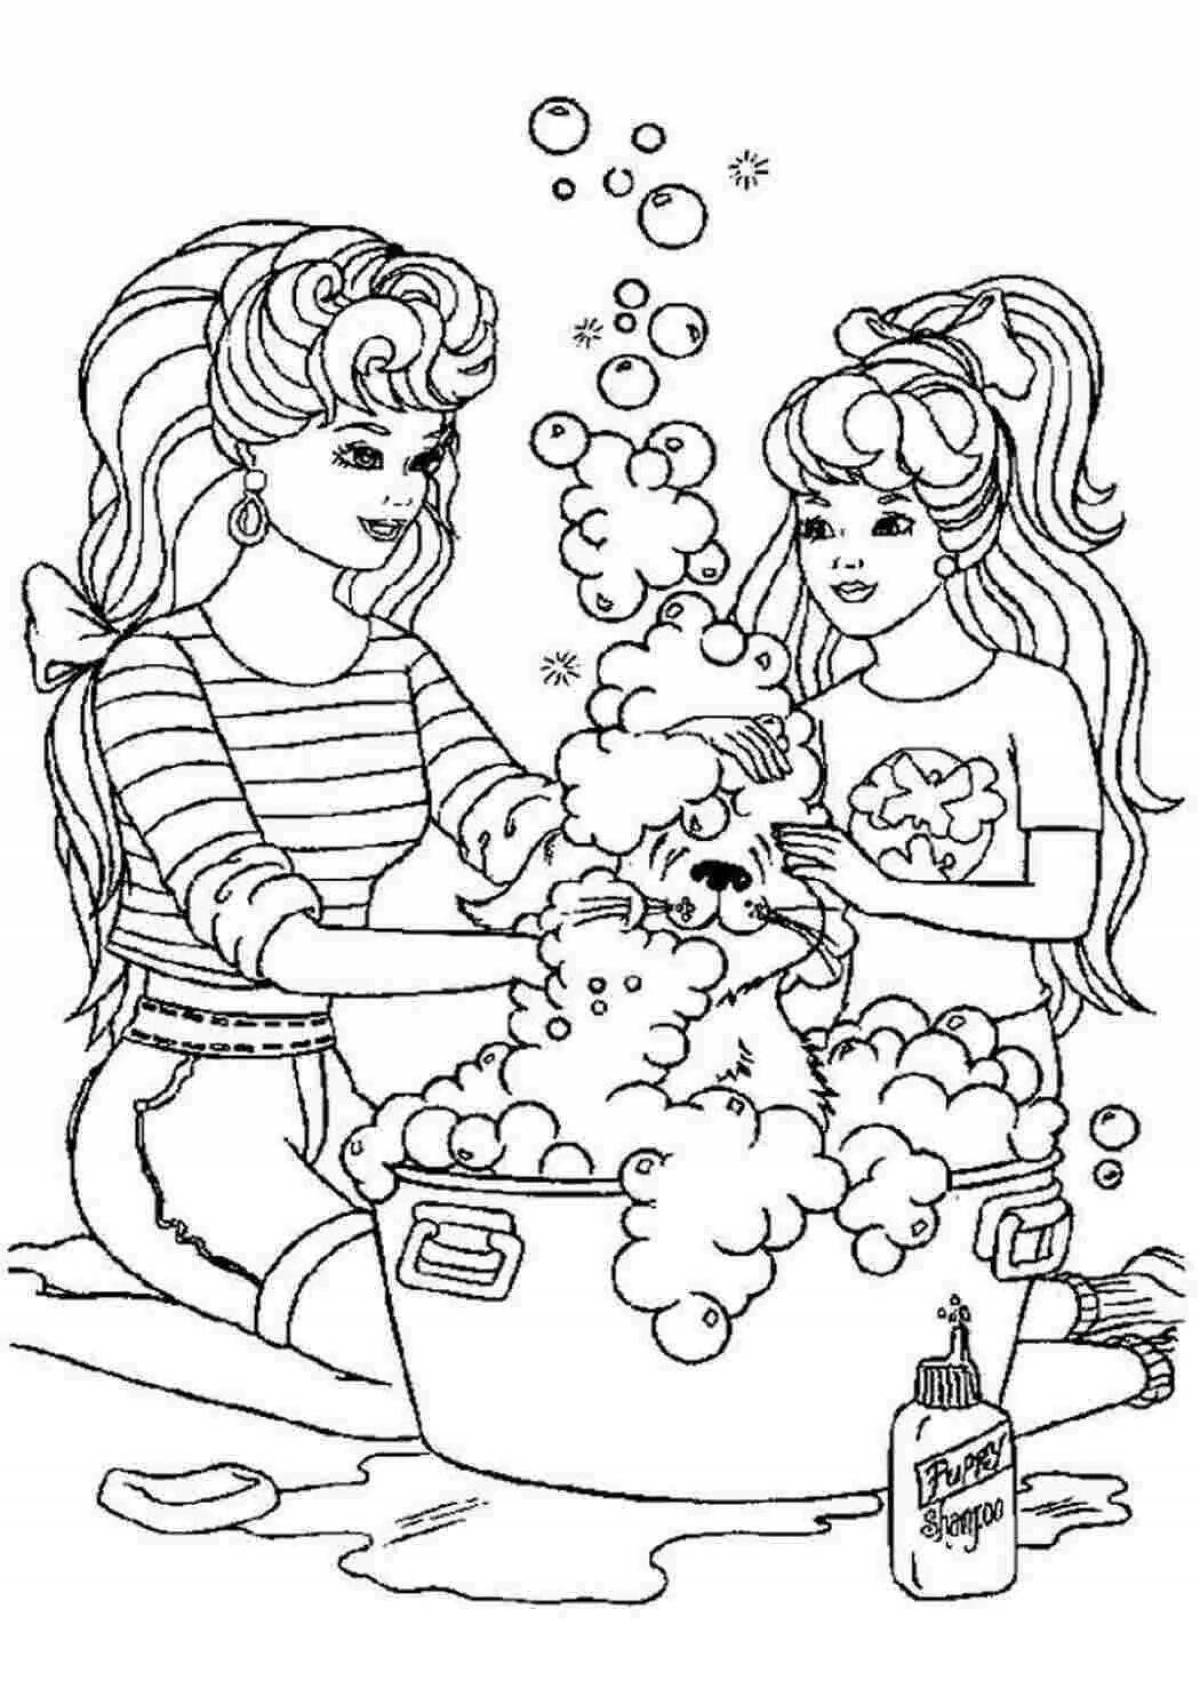 Coloring page loving mother and daughter